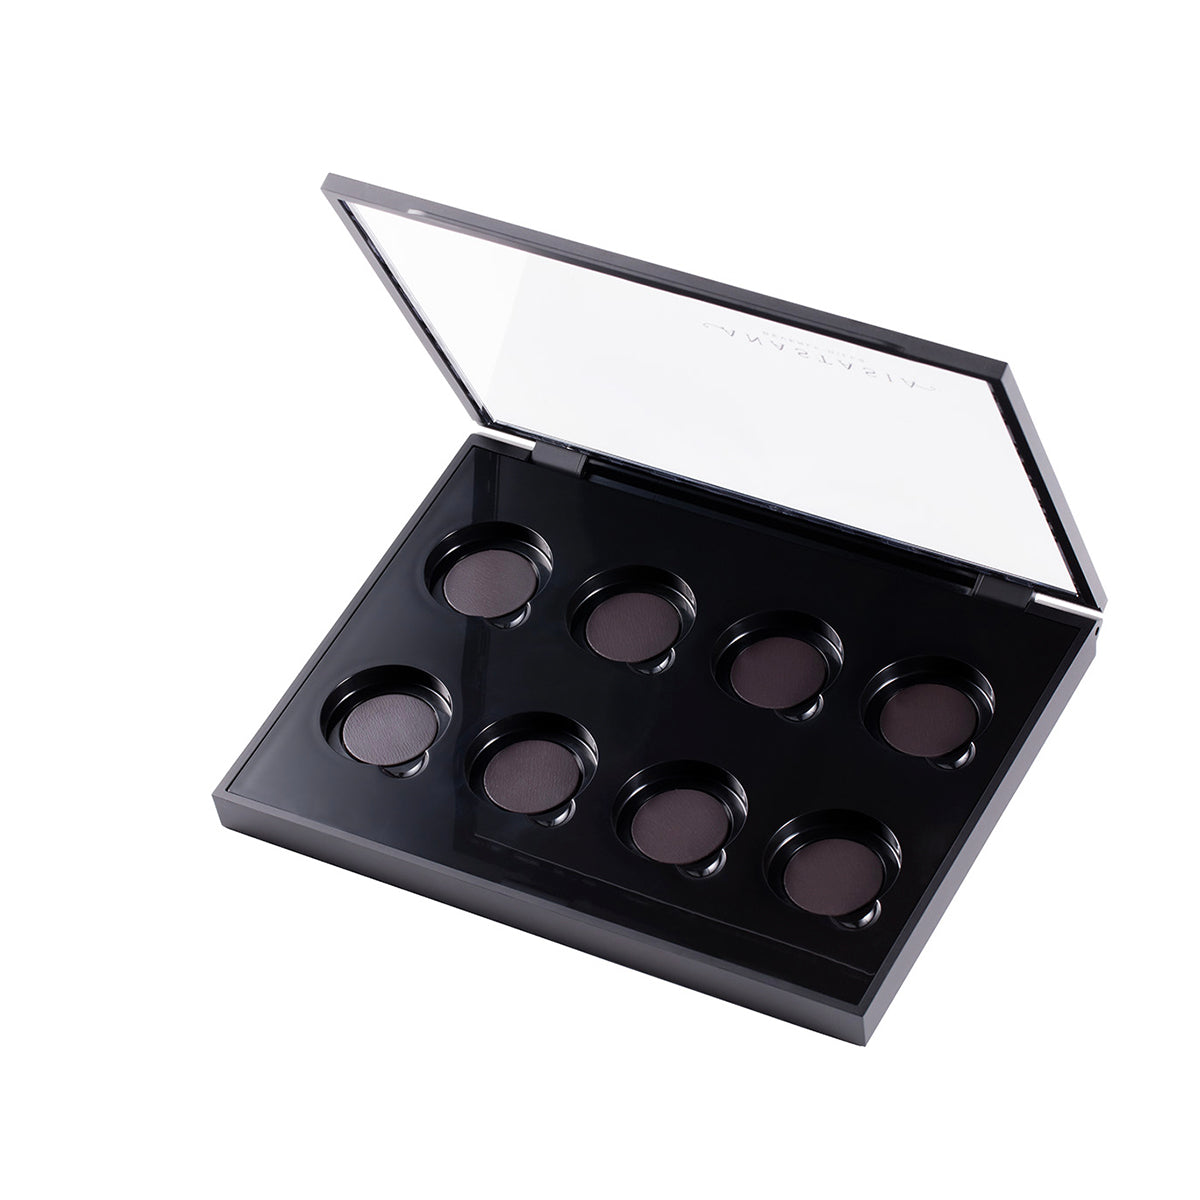 8 Well Shadow Palette